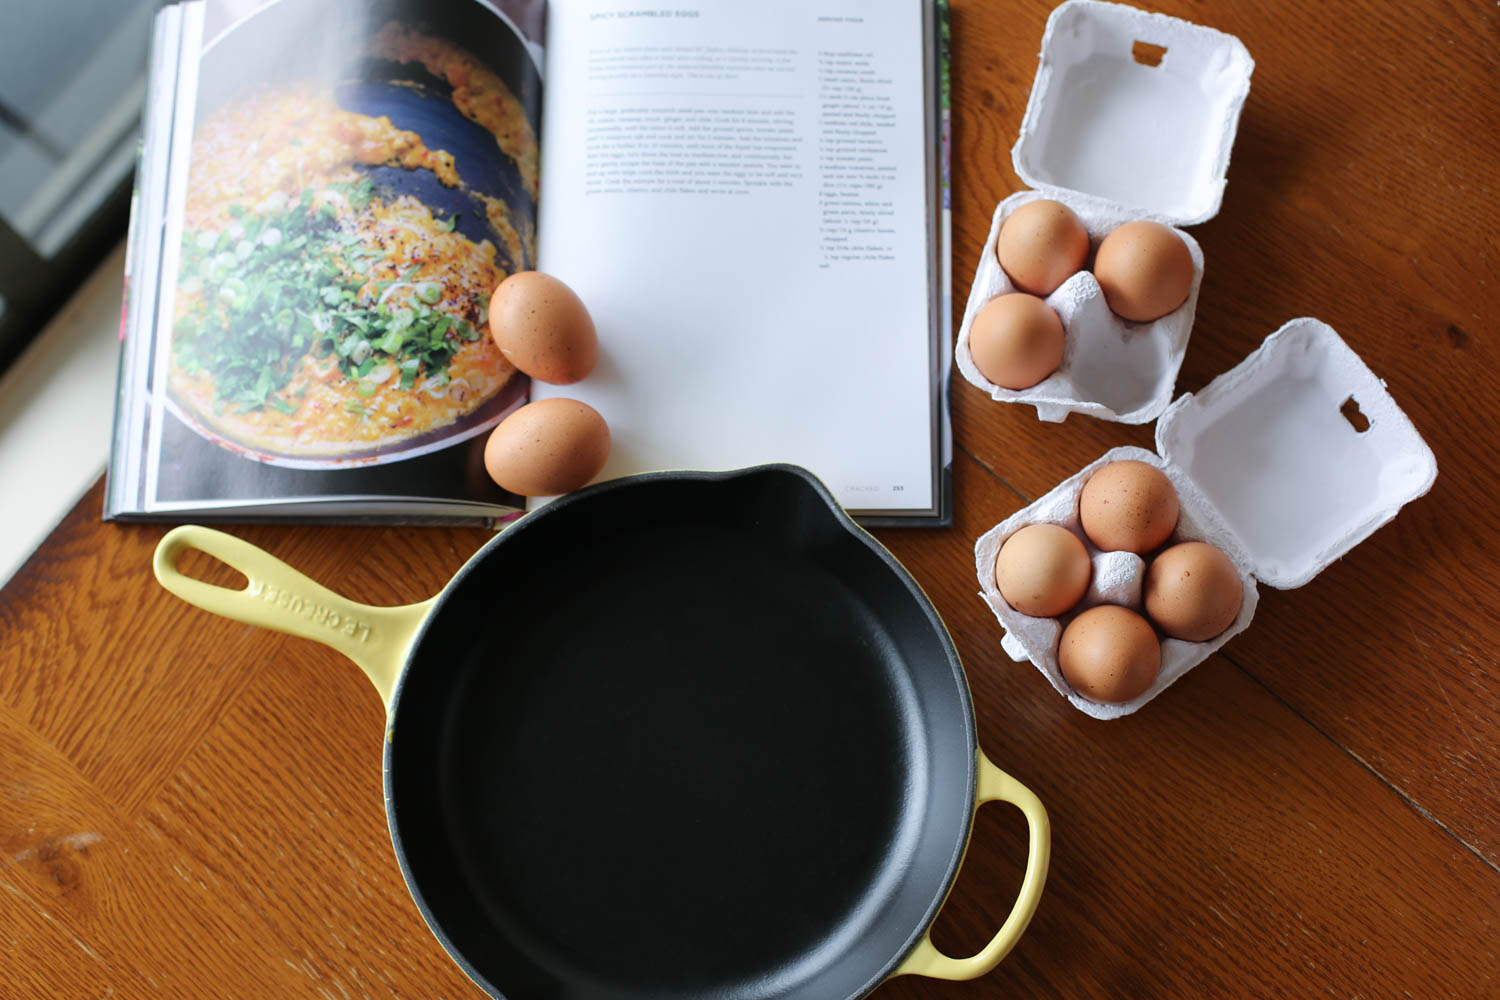 Making egg recipes using eggs from my hens. Pictured: Le Creuset 10